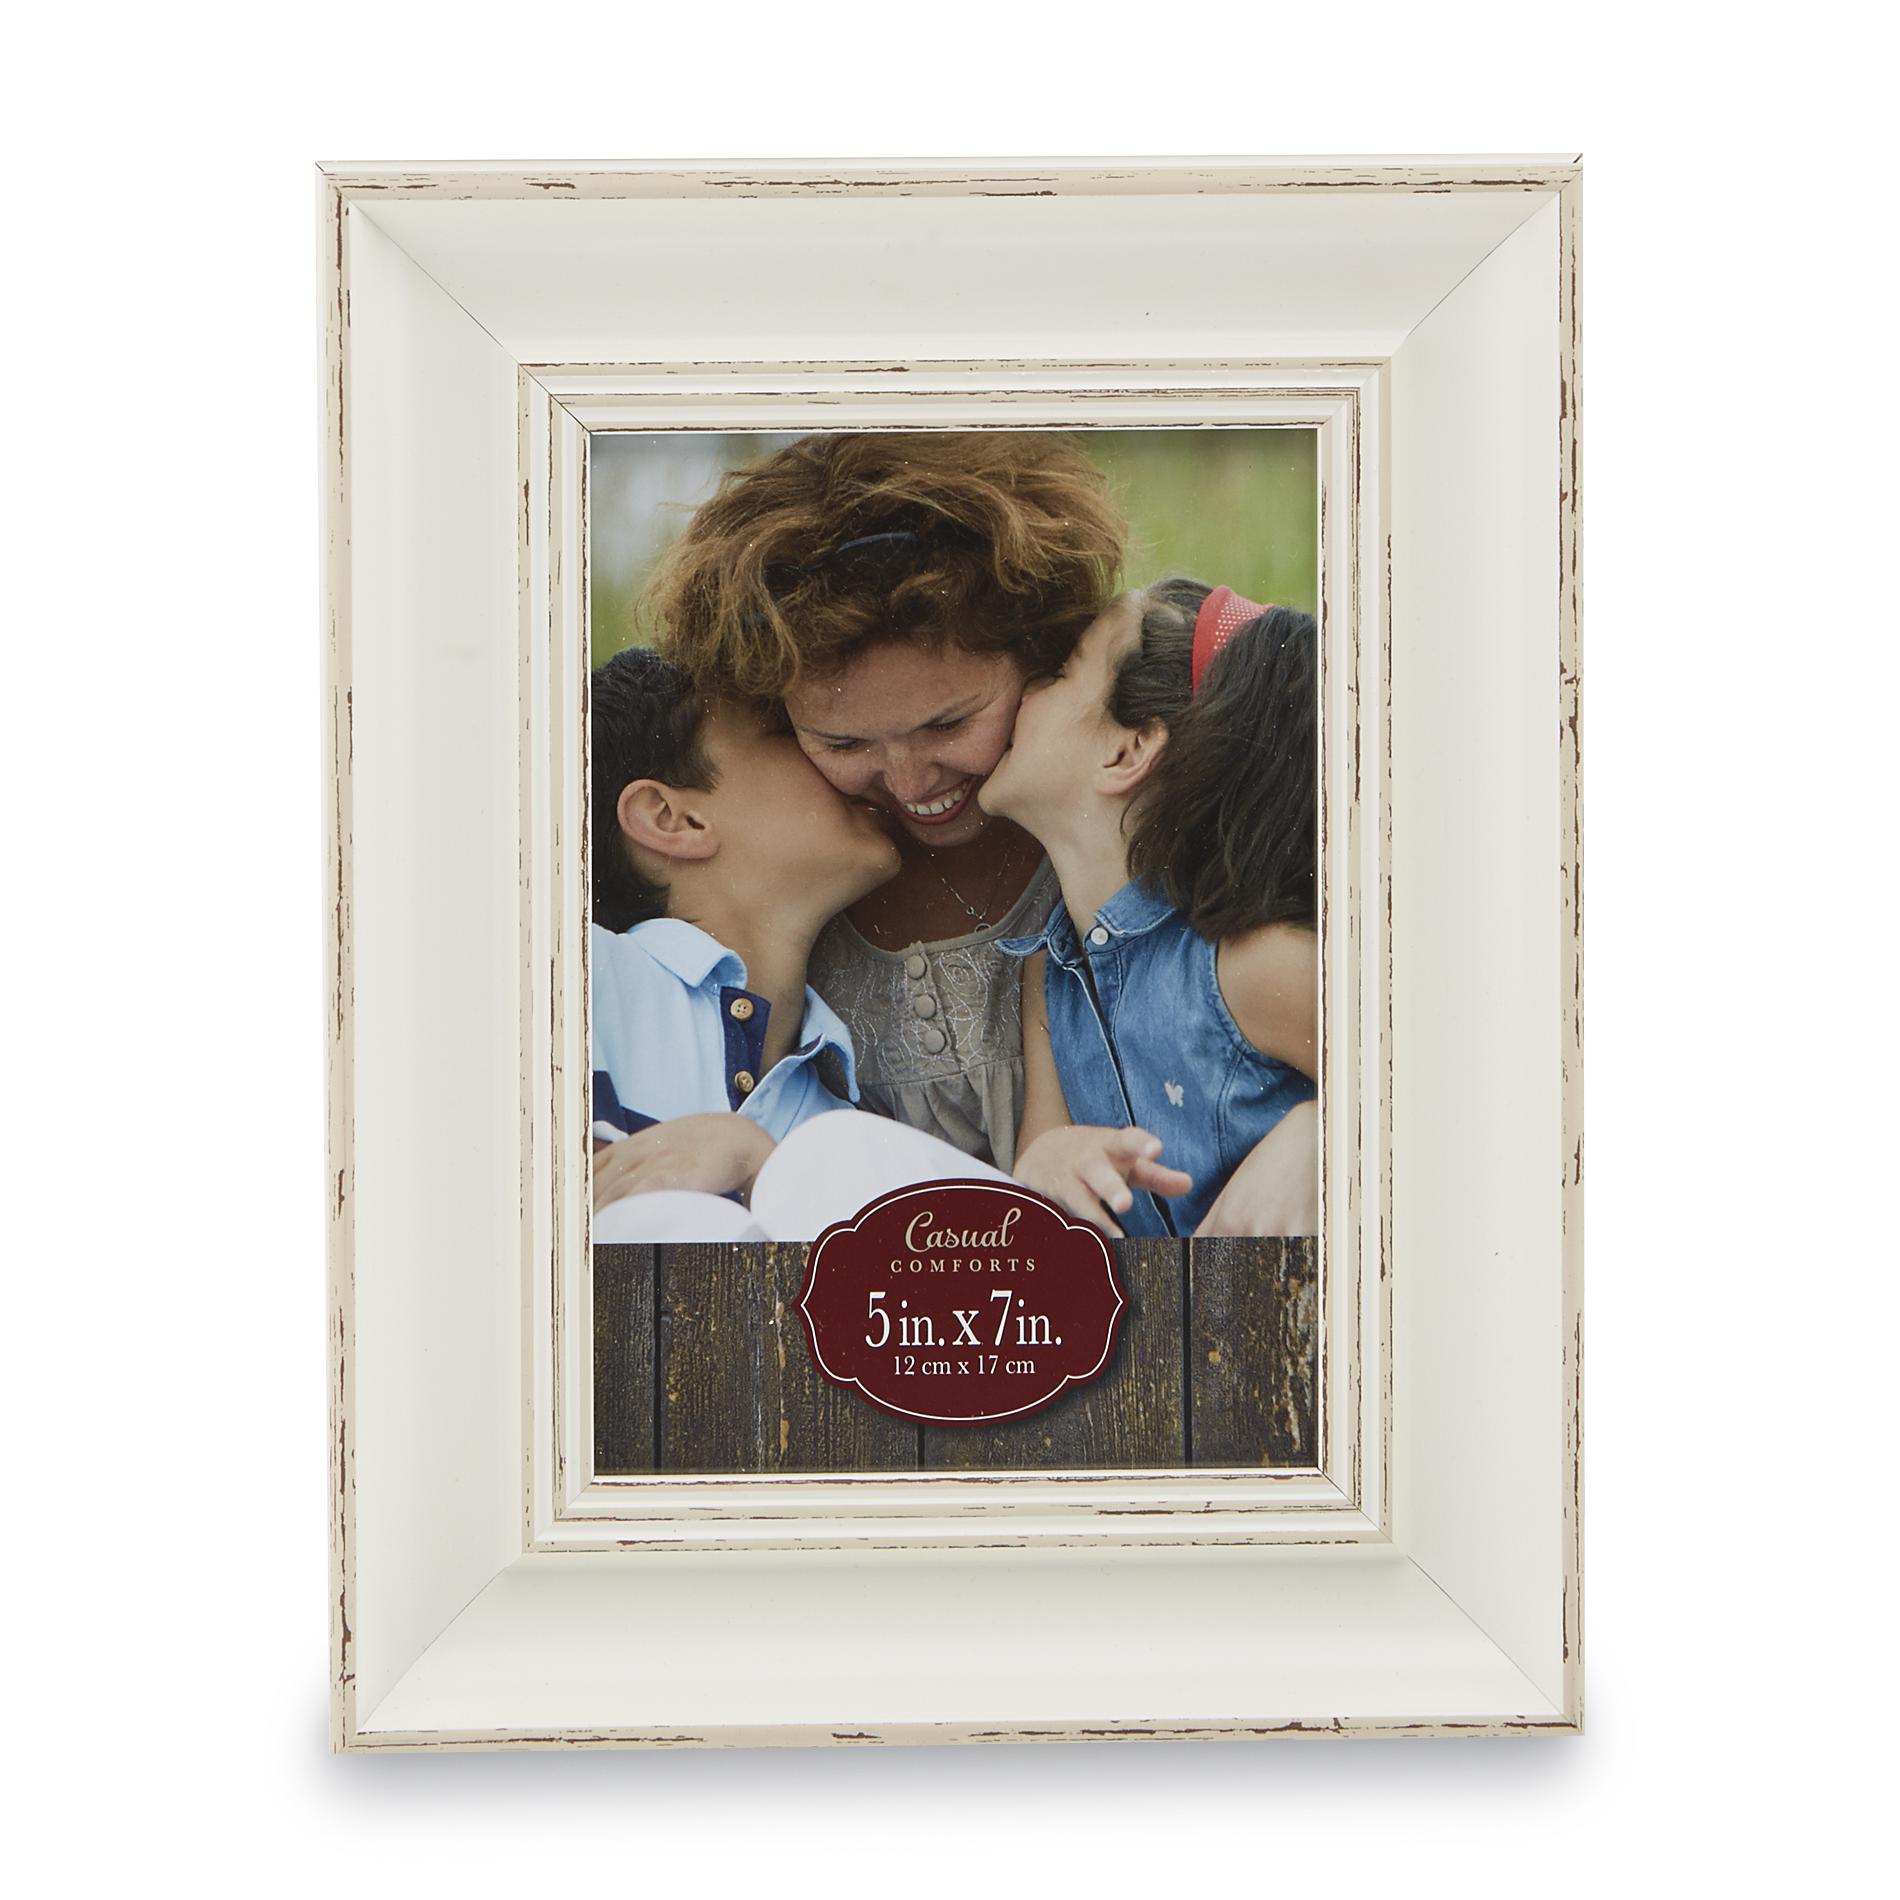 Casual Comfort Macon 5" x 7" Picture Frame - White